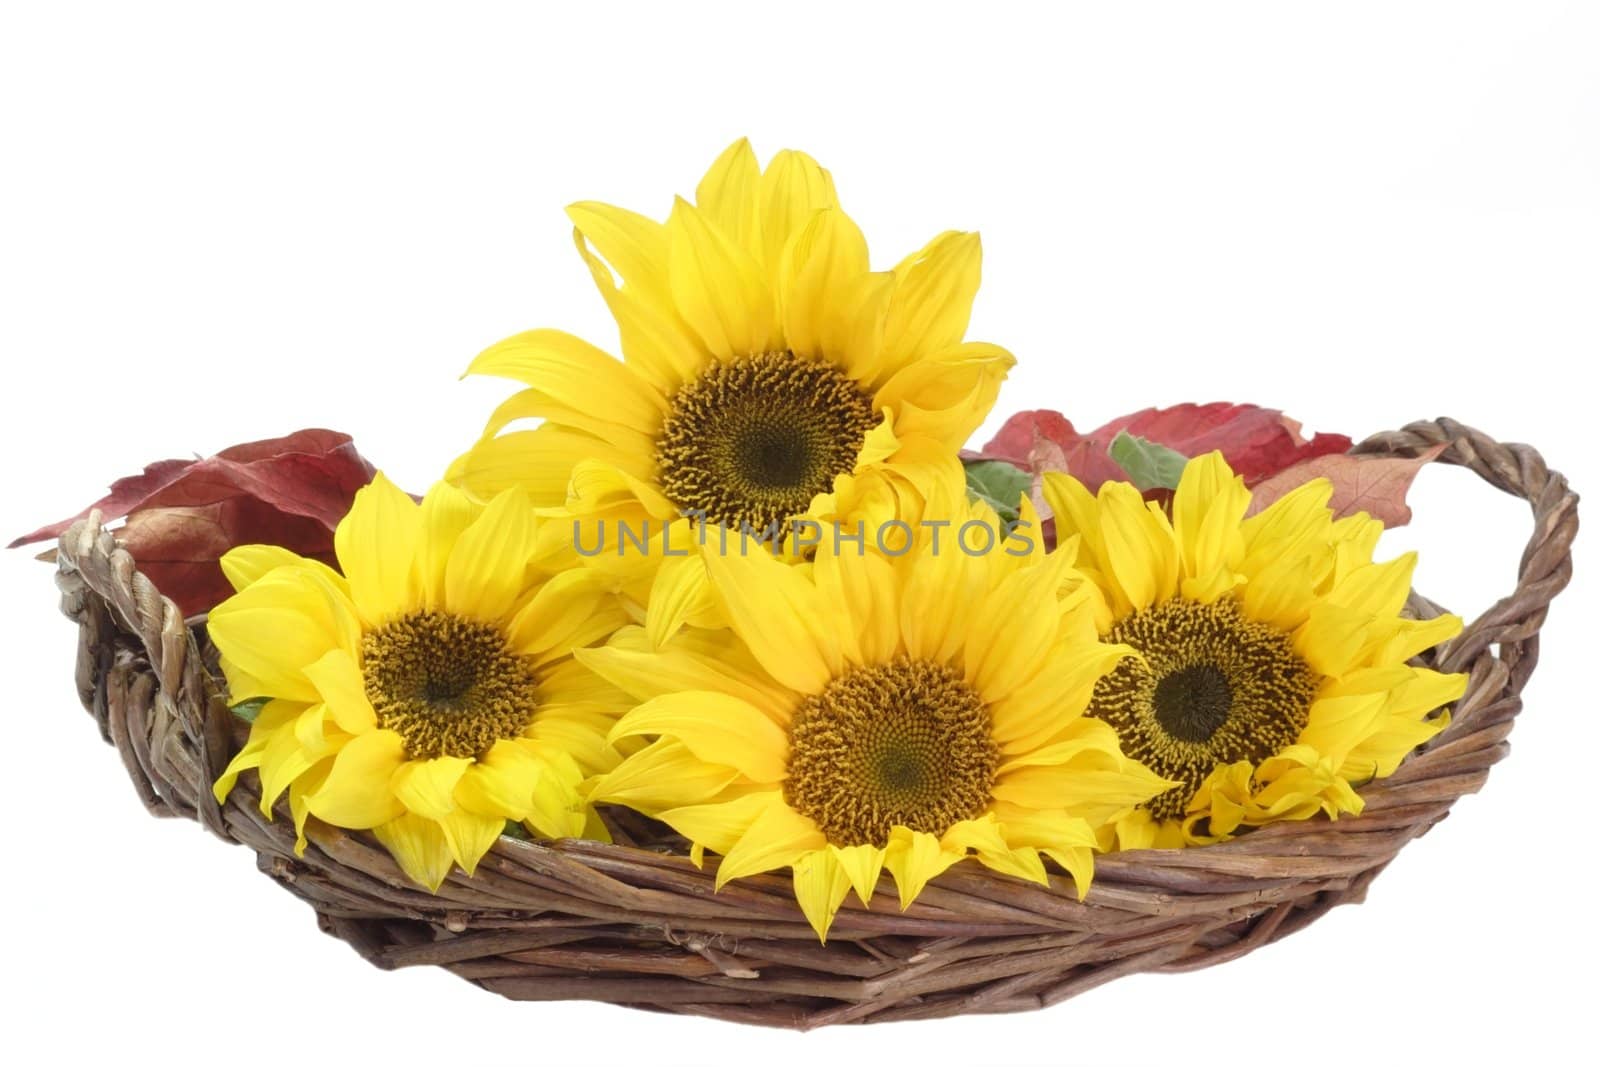 Sunflowers in a basket - isolated on white background